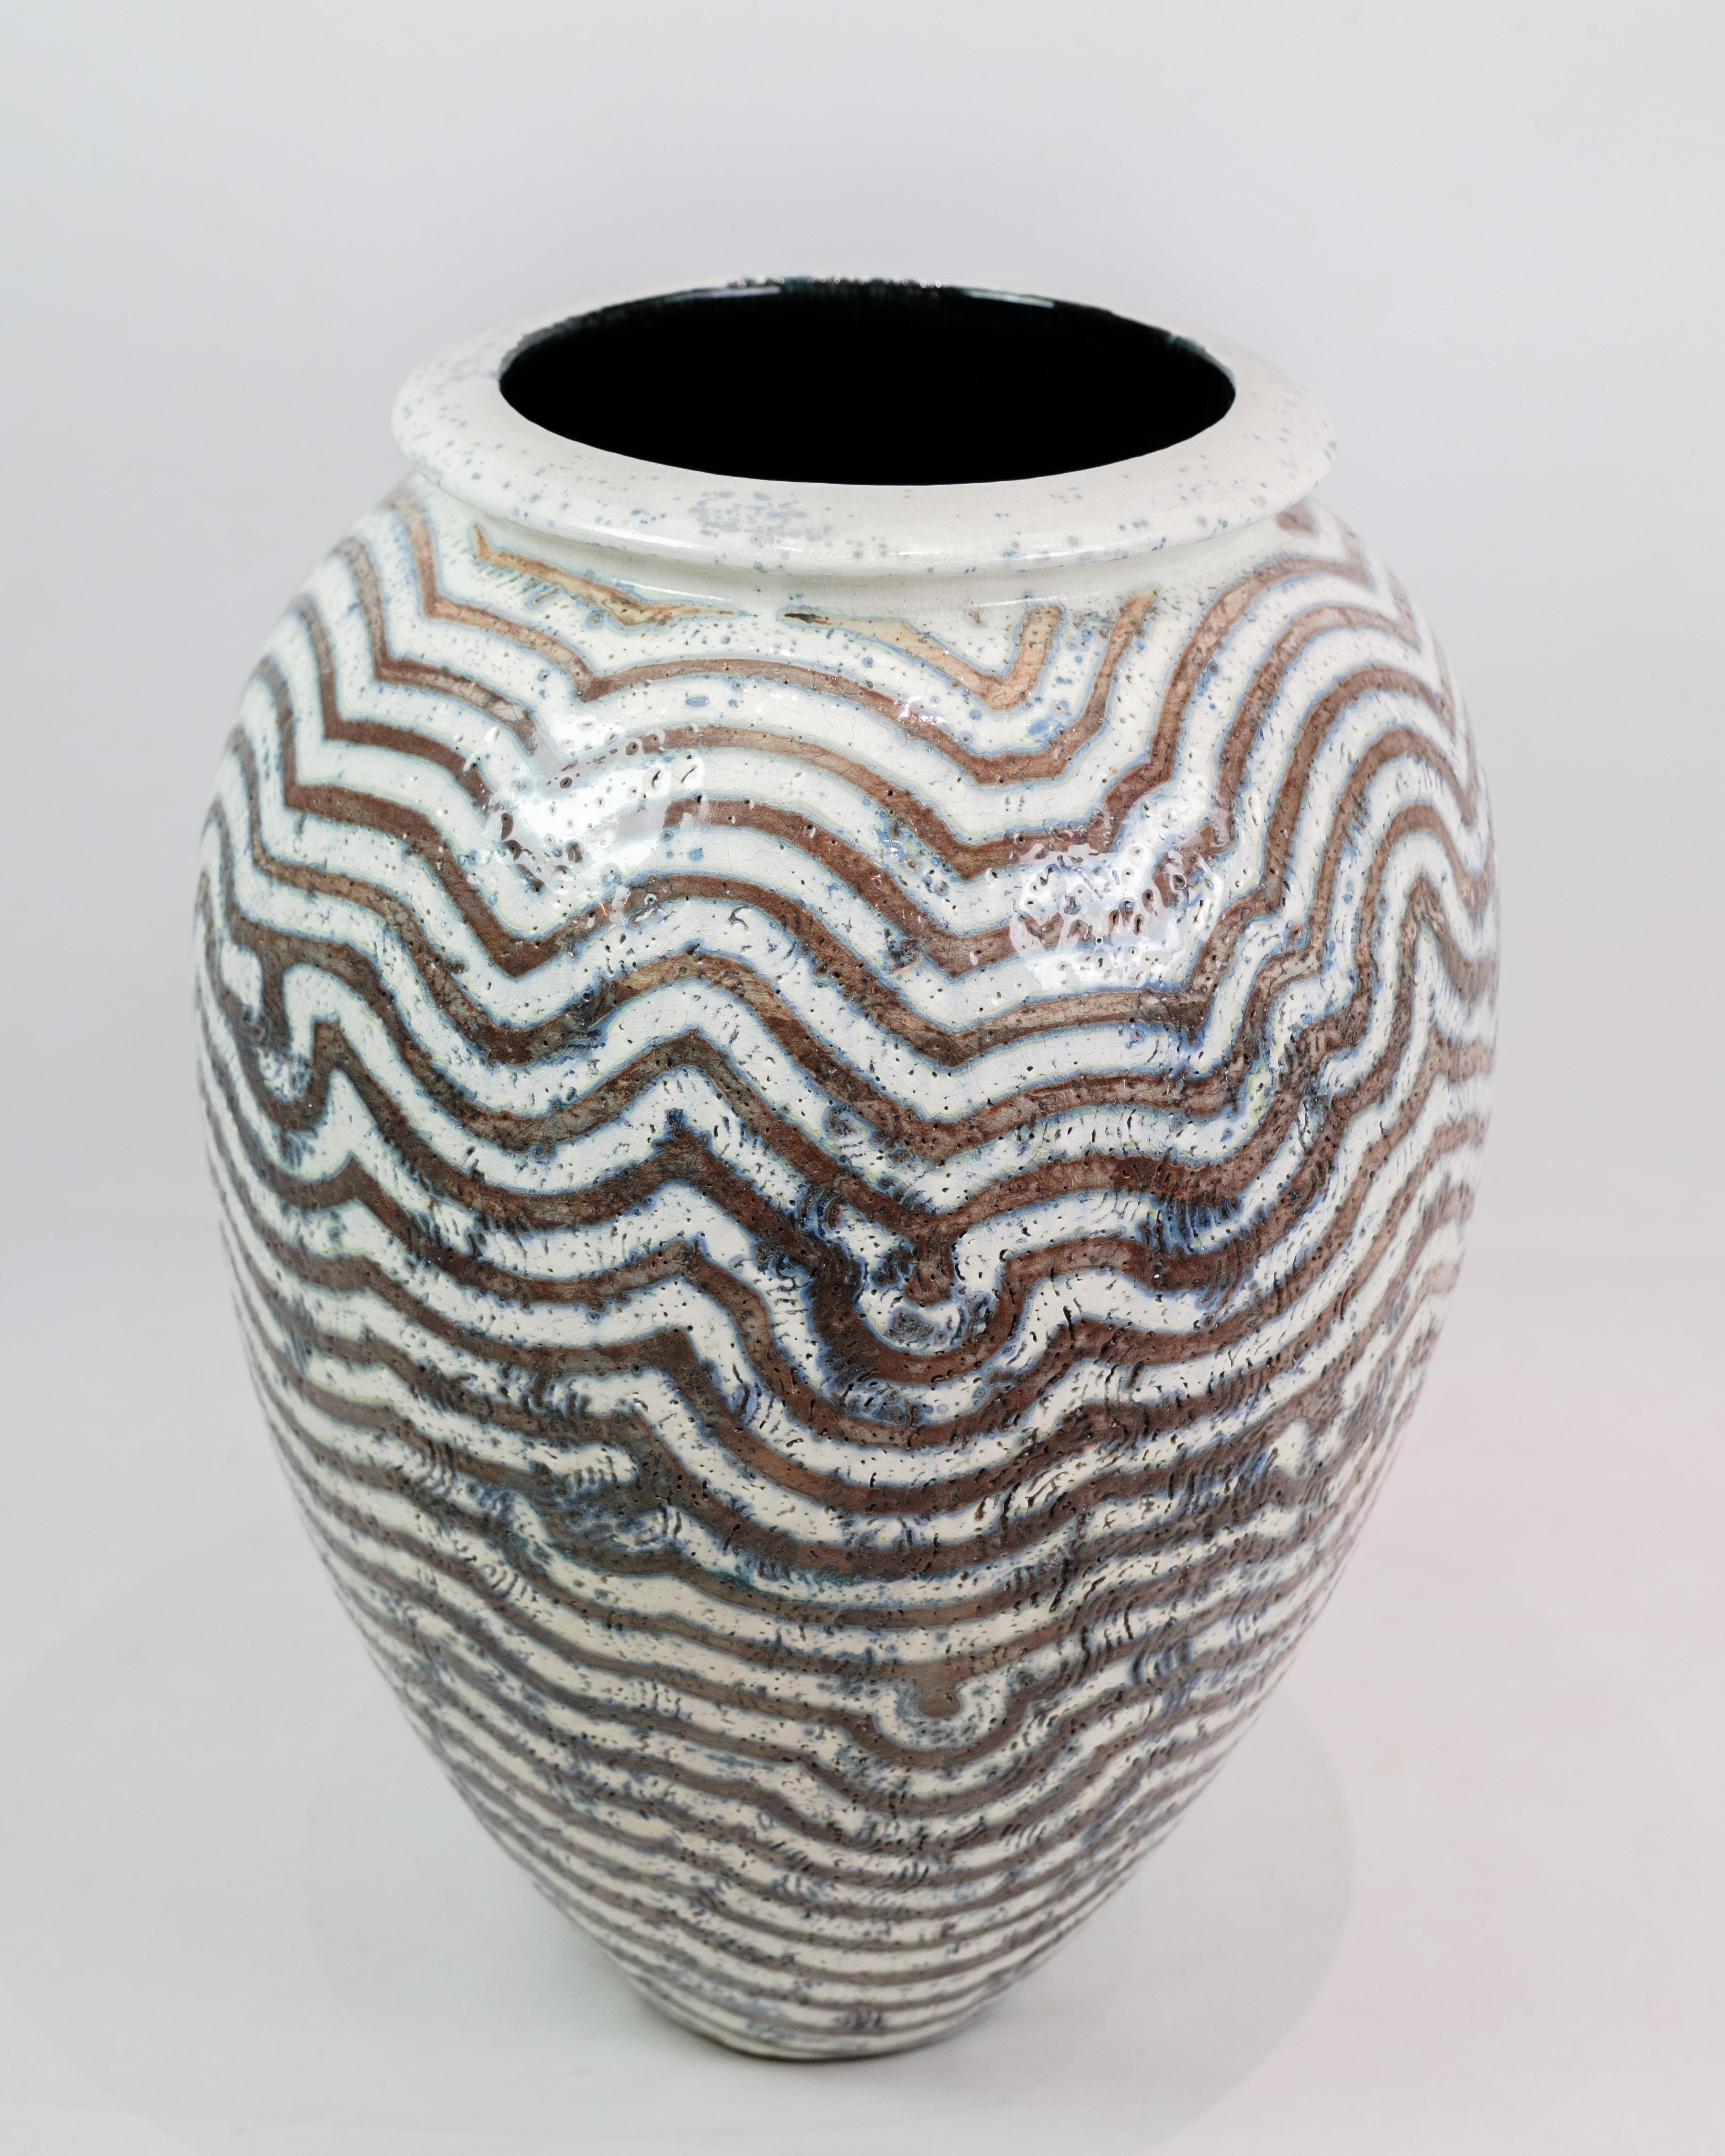 Spruce up your home with a unique statement piece - a large stoneware floor vase, designed and glazed by the talented Per Weiss in a beautiful combination of blue, gray and white colours. Created with care and originality, this vase exudes a